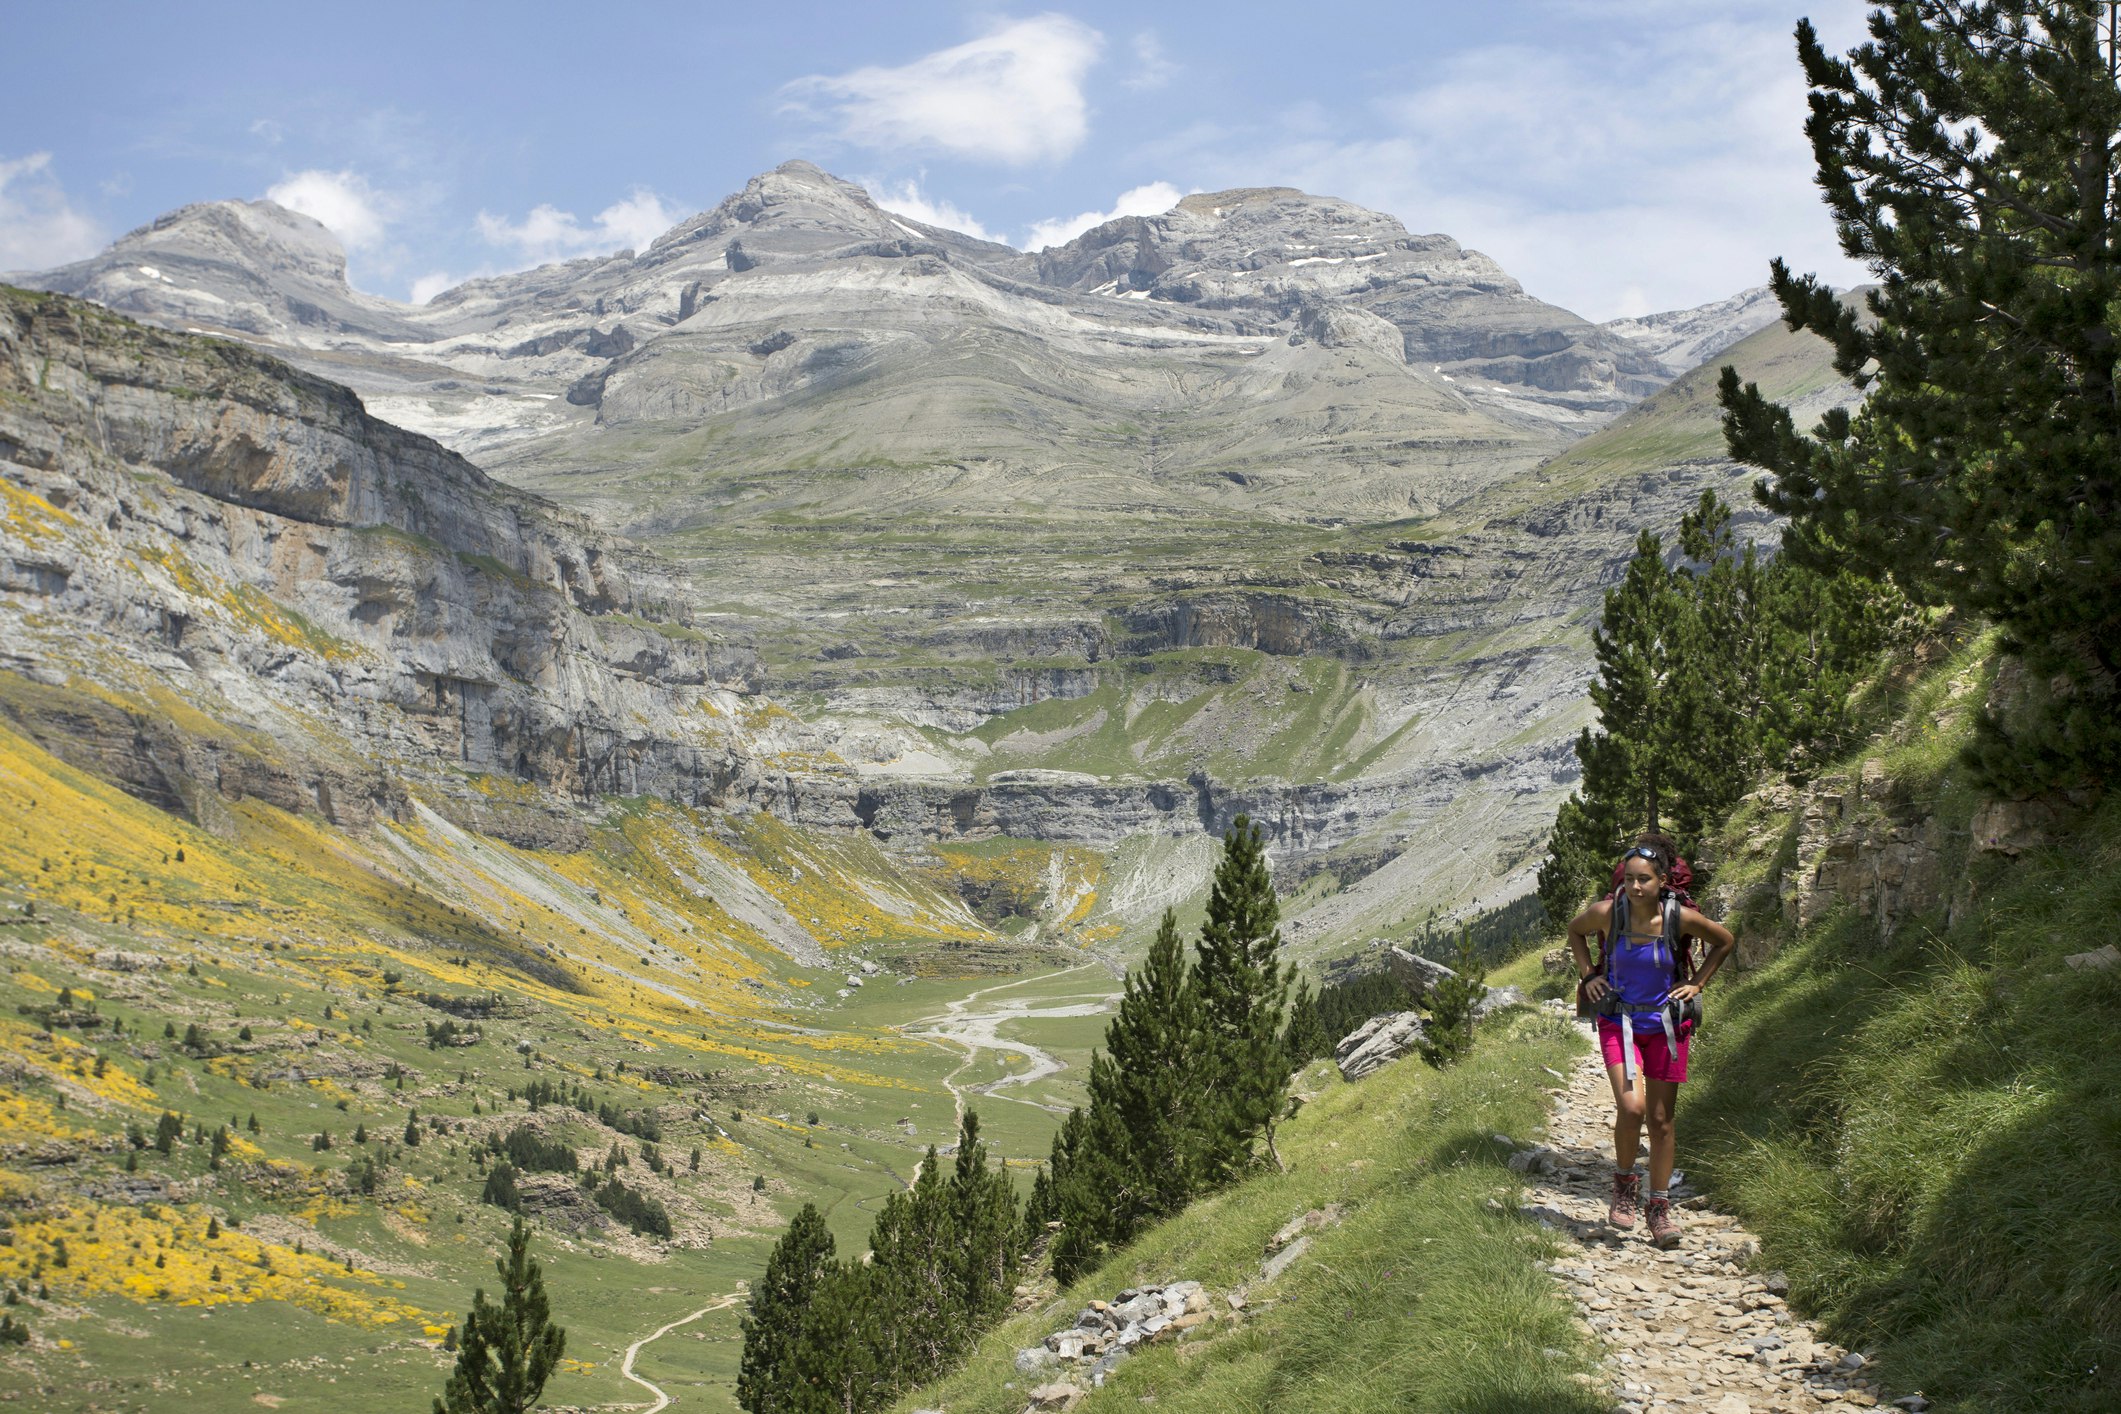 A woman hikes on a trail in the Pyrenees mountains, Spain